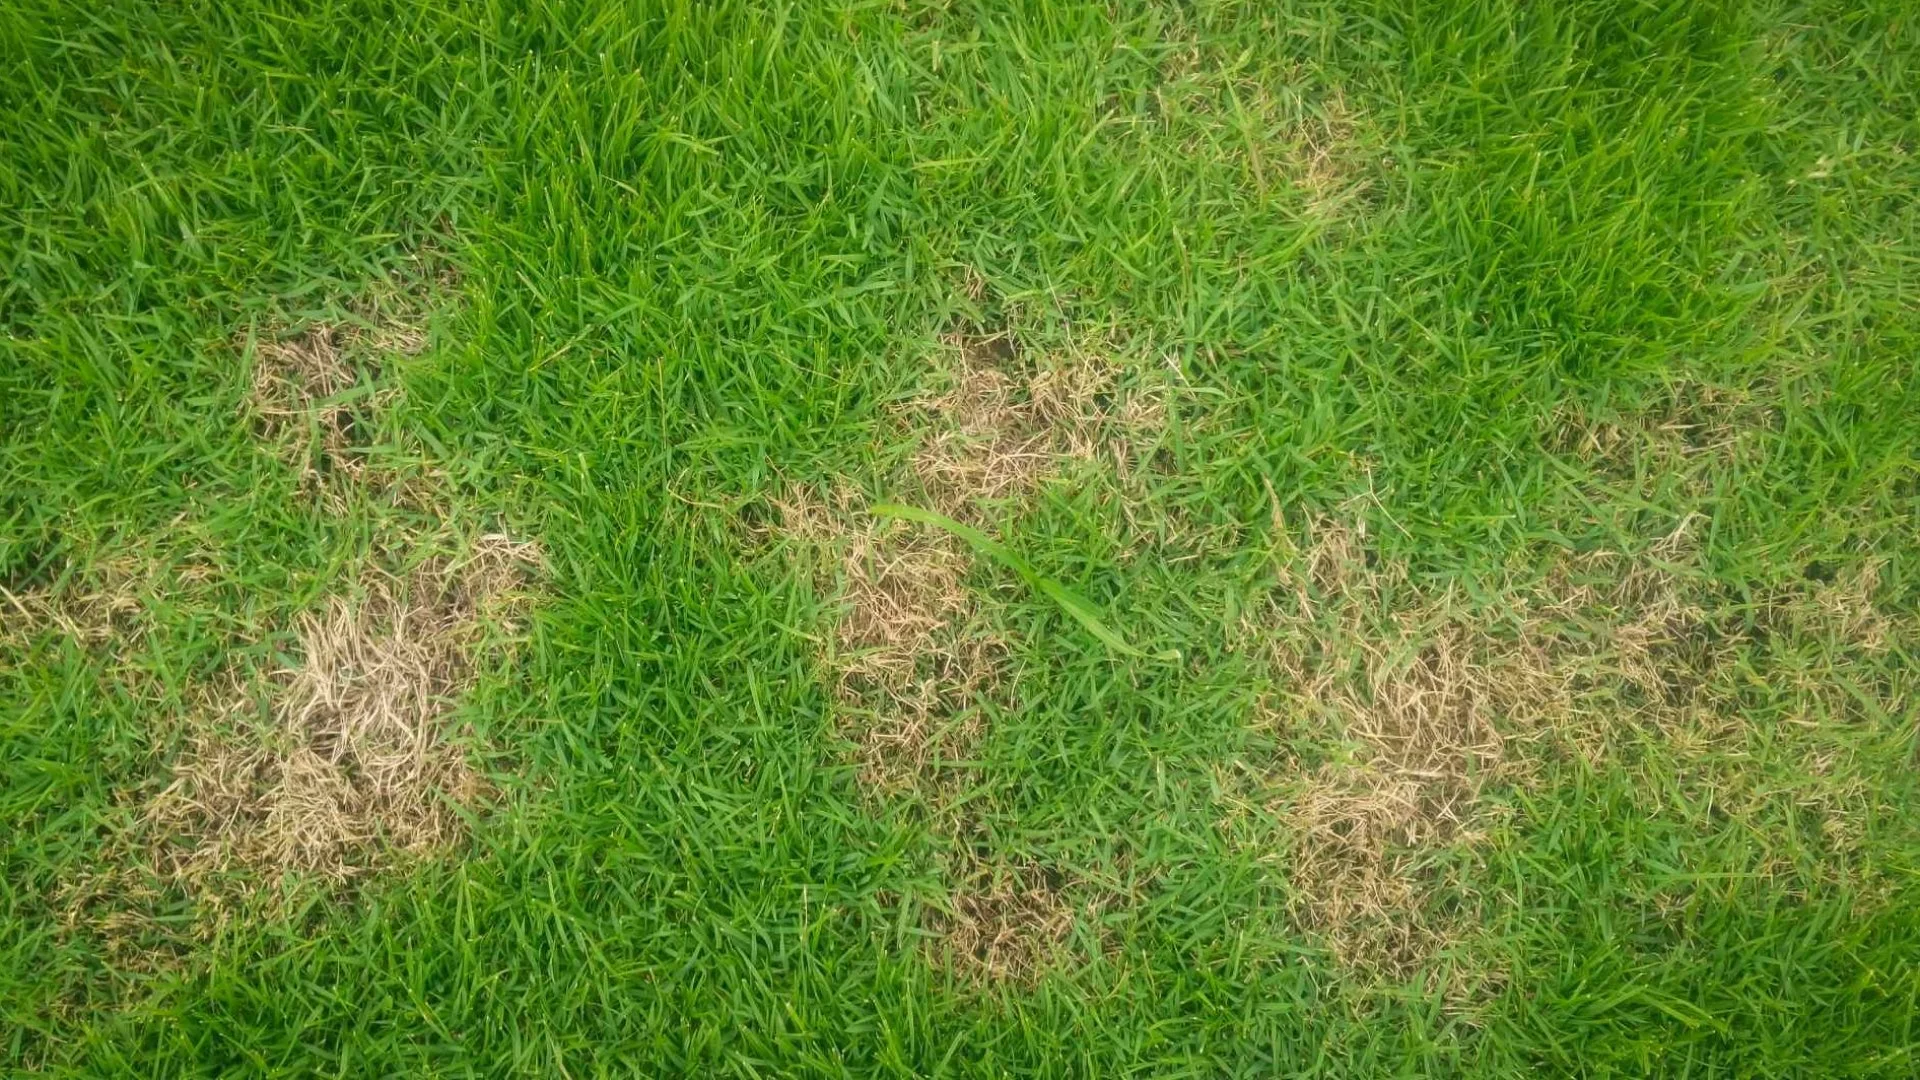 Fairy Ring & Dollar Spot - Two Lawn Diseases to Keep an Eye Out For